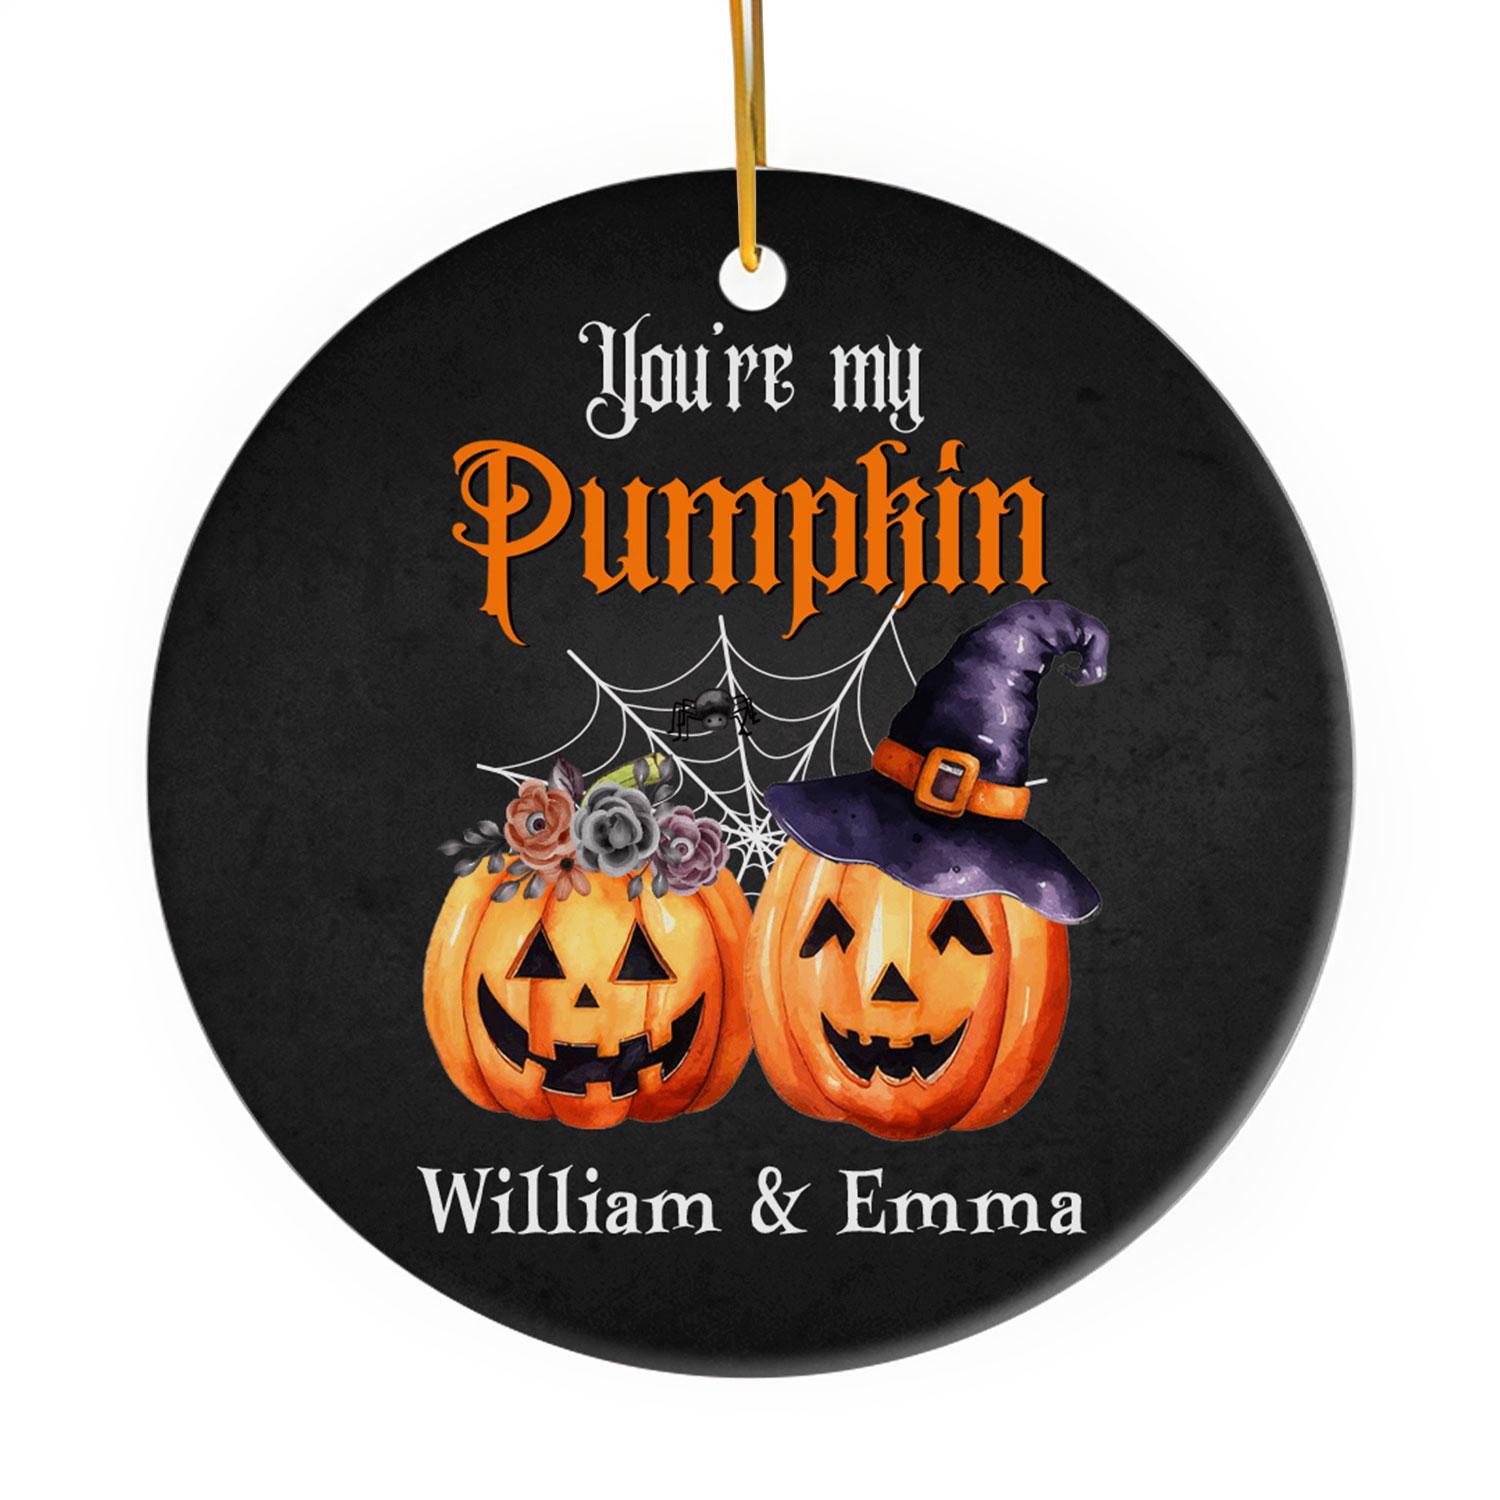 You're My Pumpkin - Personalized Anniversary or Halloween gift for Boyfriend or Girlfriend - Custom Circle Ceramic Ornament - MyMindfulGifts